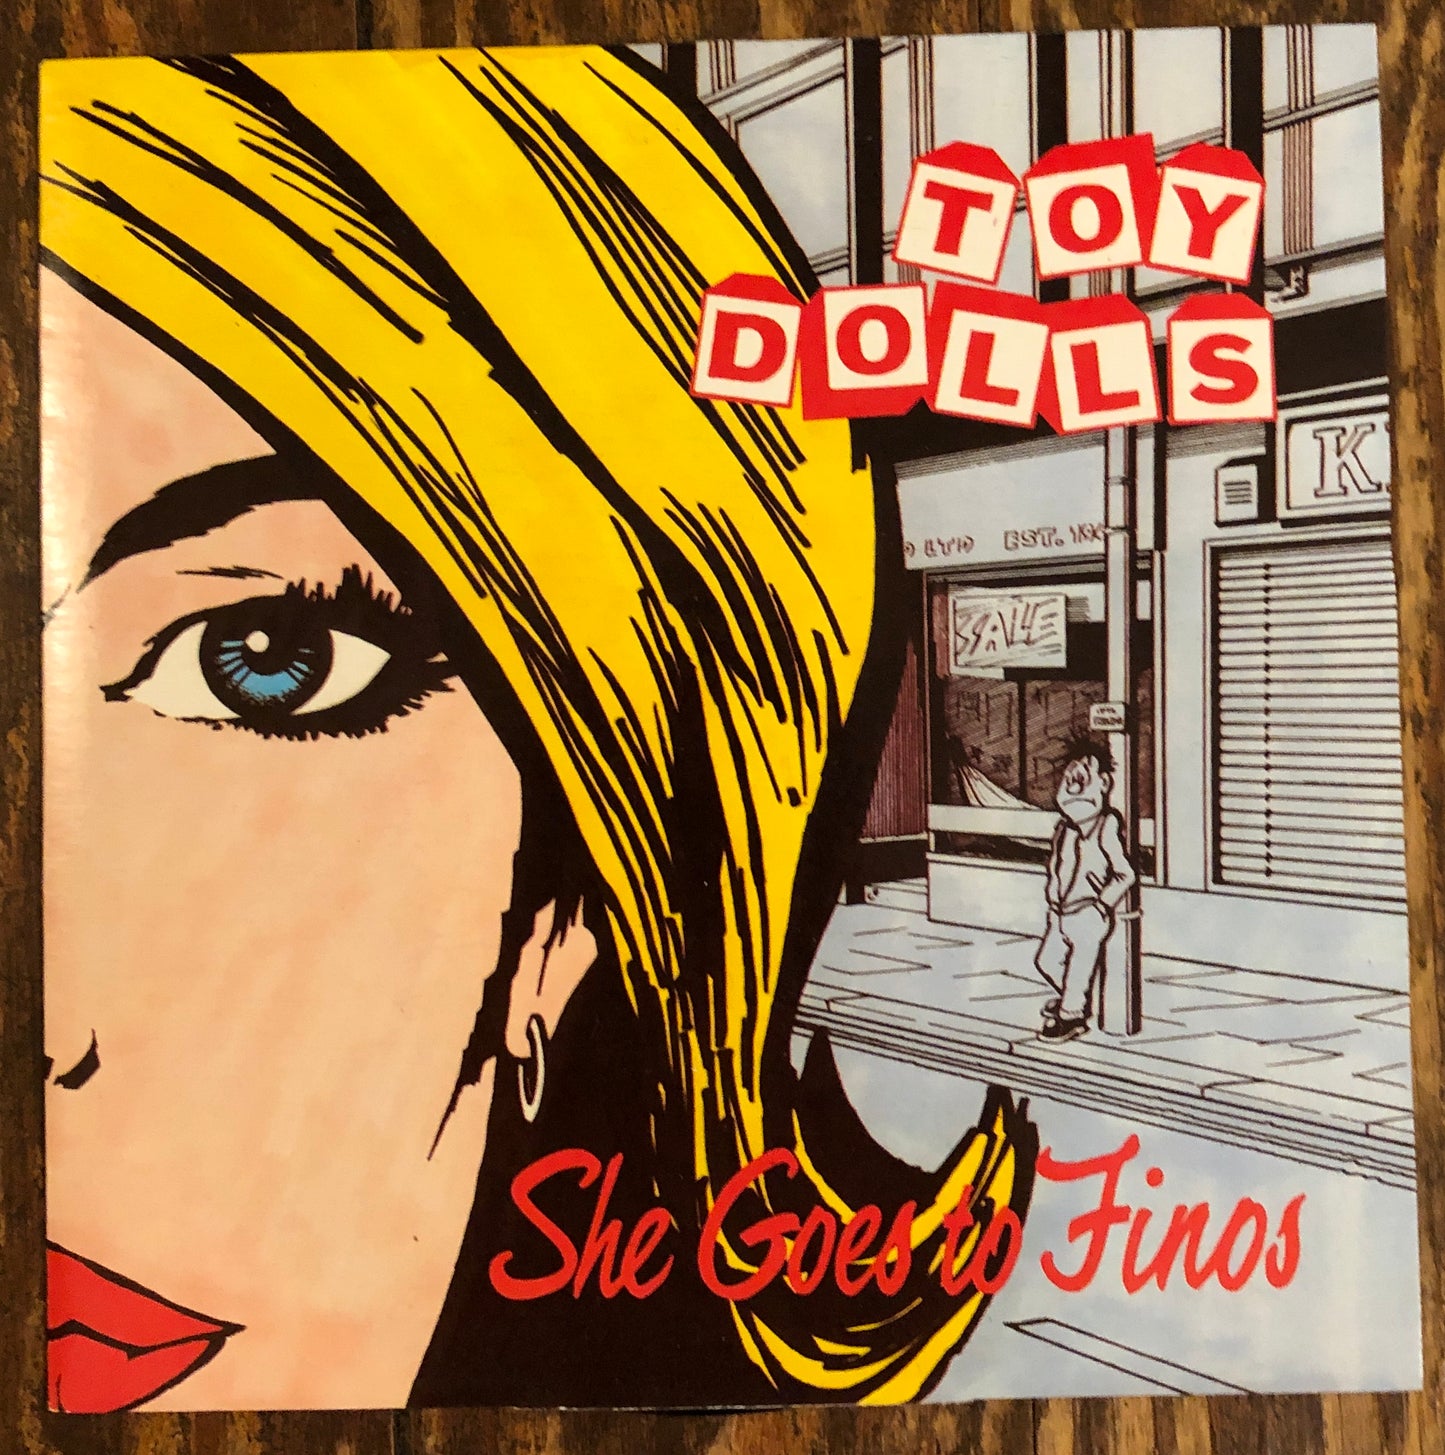 TOY DOLLS "She Goes to Finos"